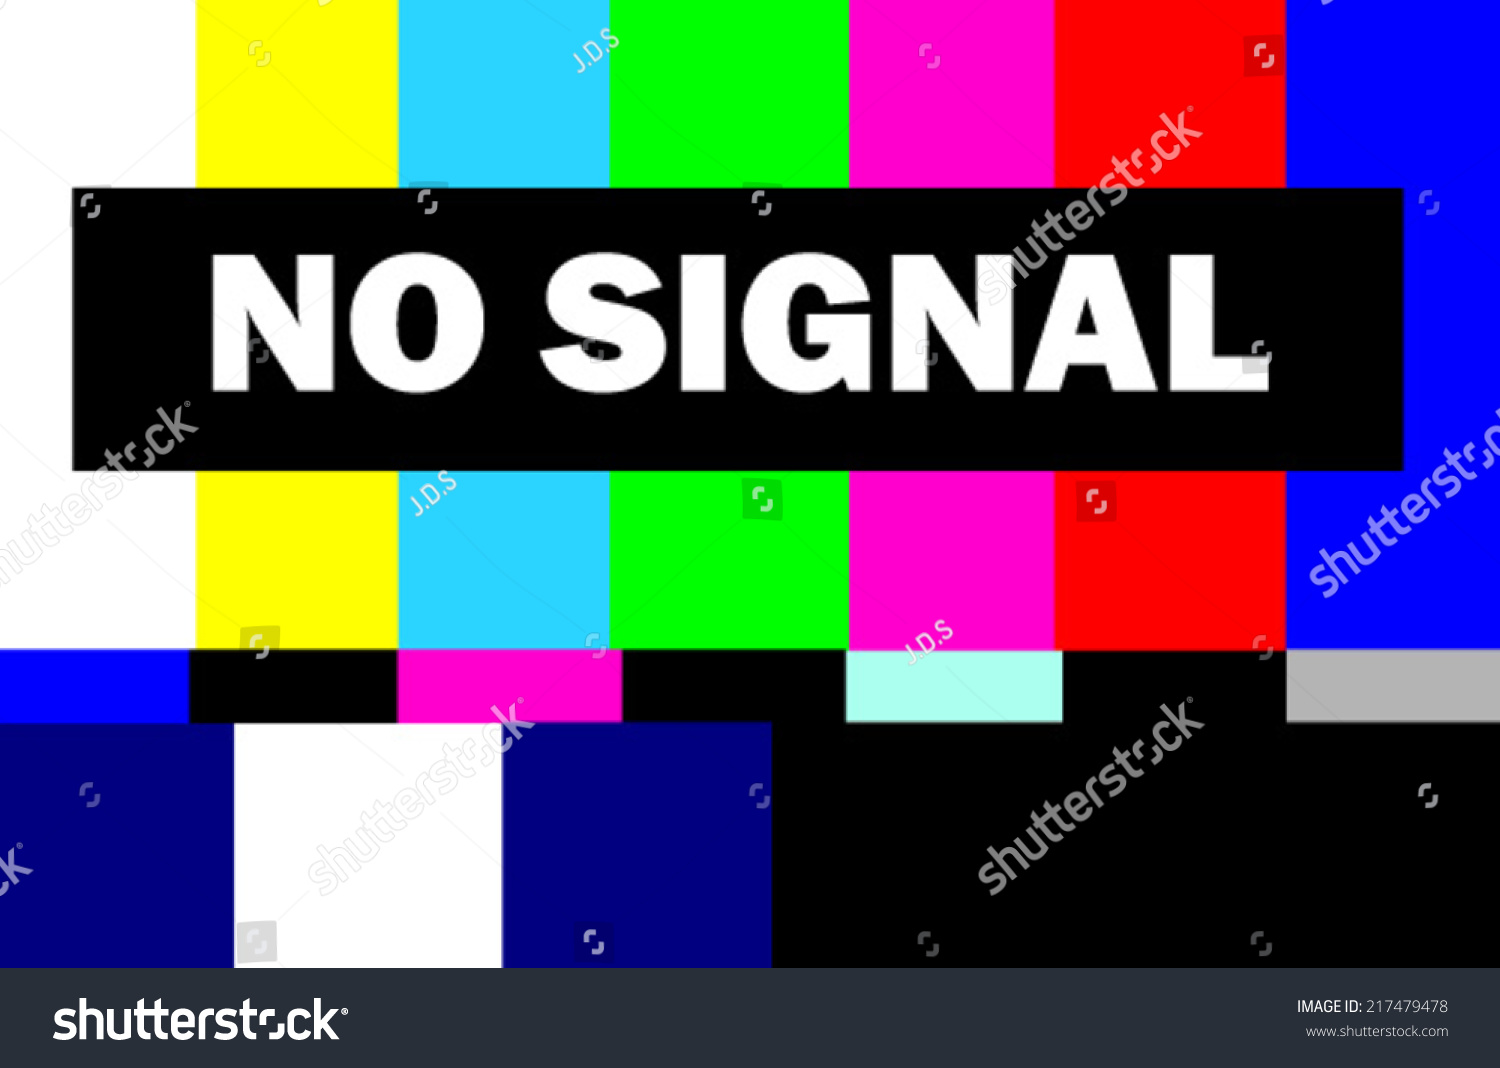 Colorful Tv Test Pattern No Signal Stock Vector 217479478 - Shutterstock